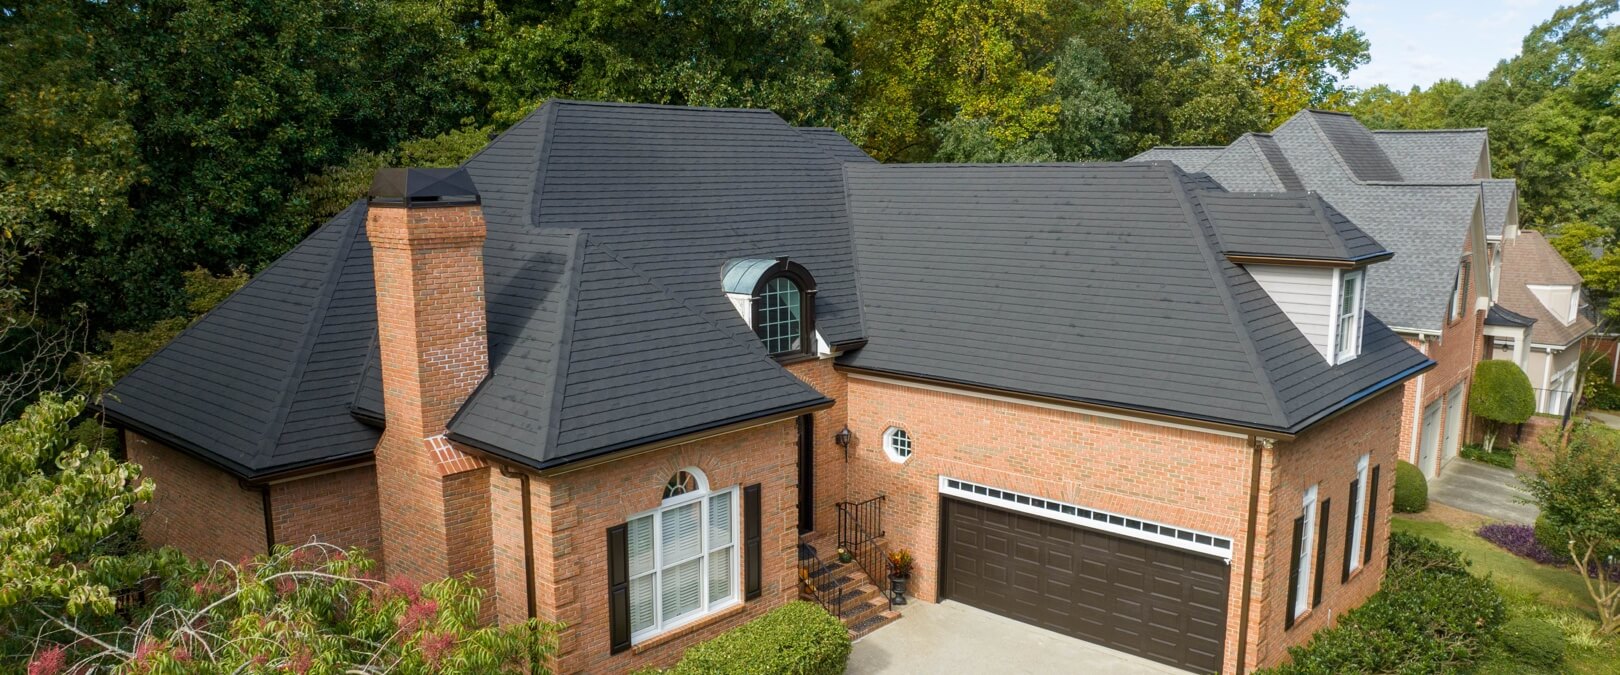 Red Brick Home with Metal Roof, Charcoal